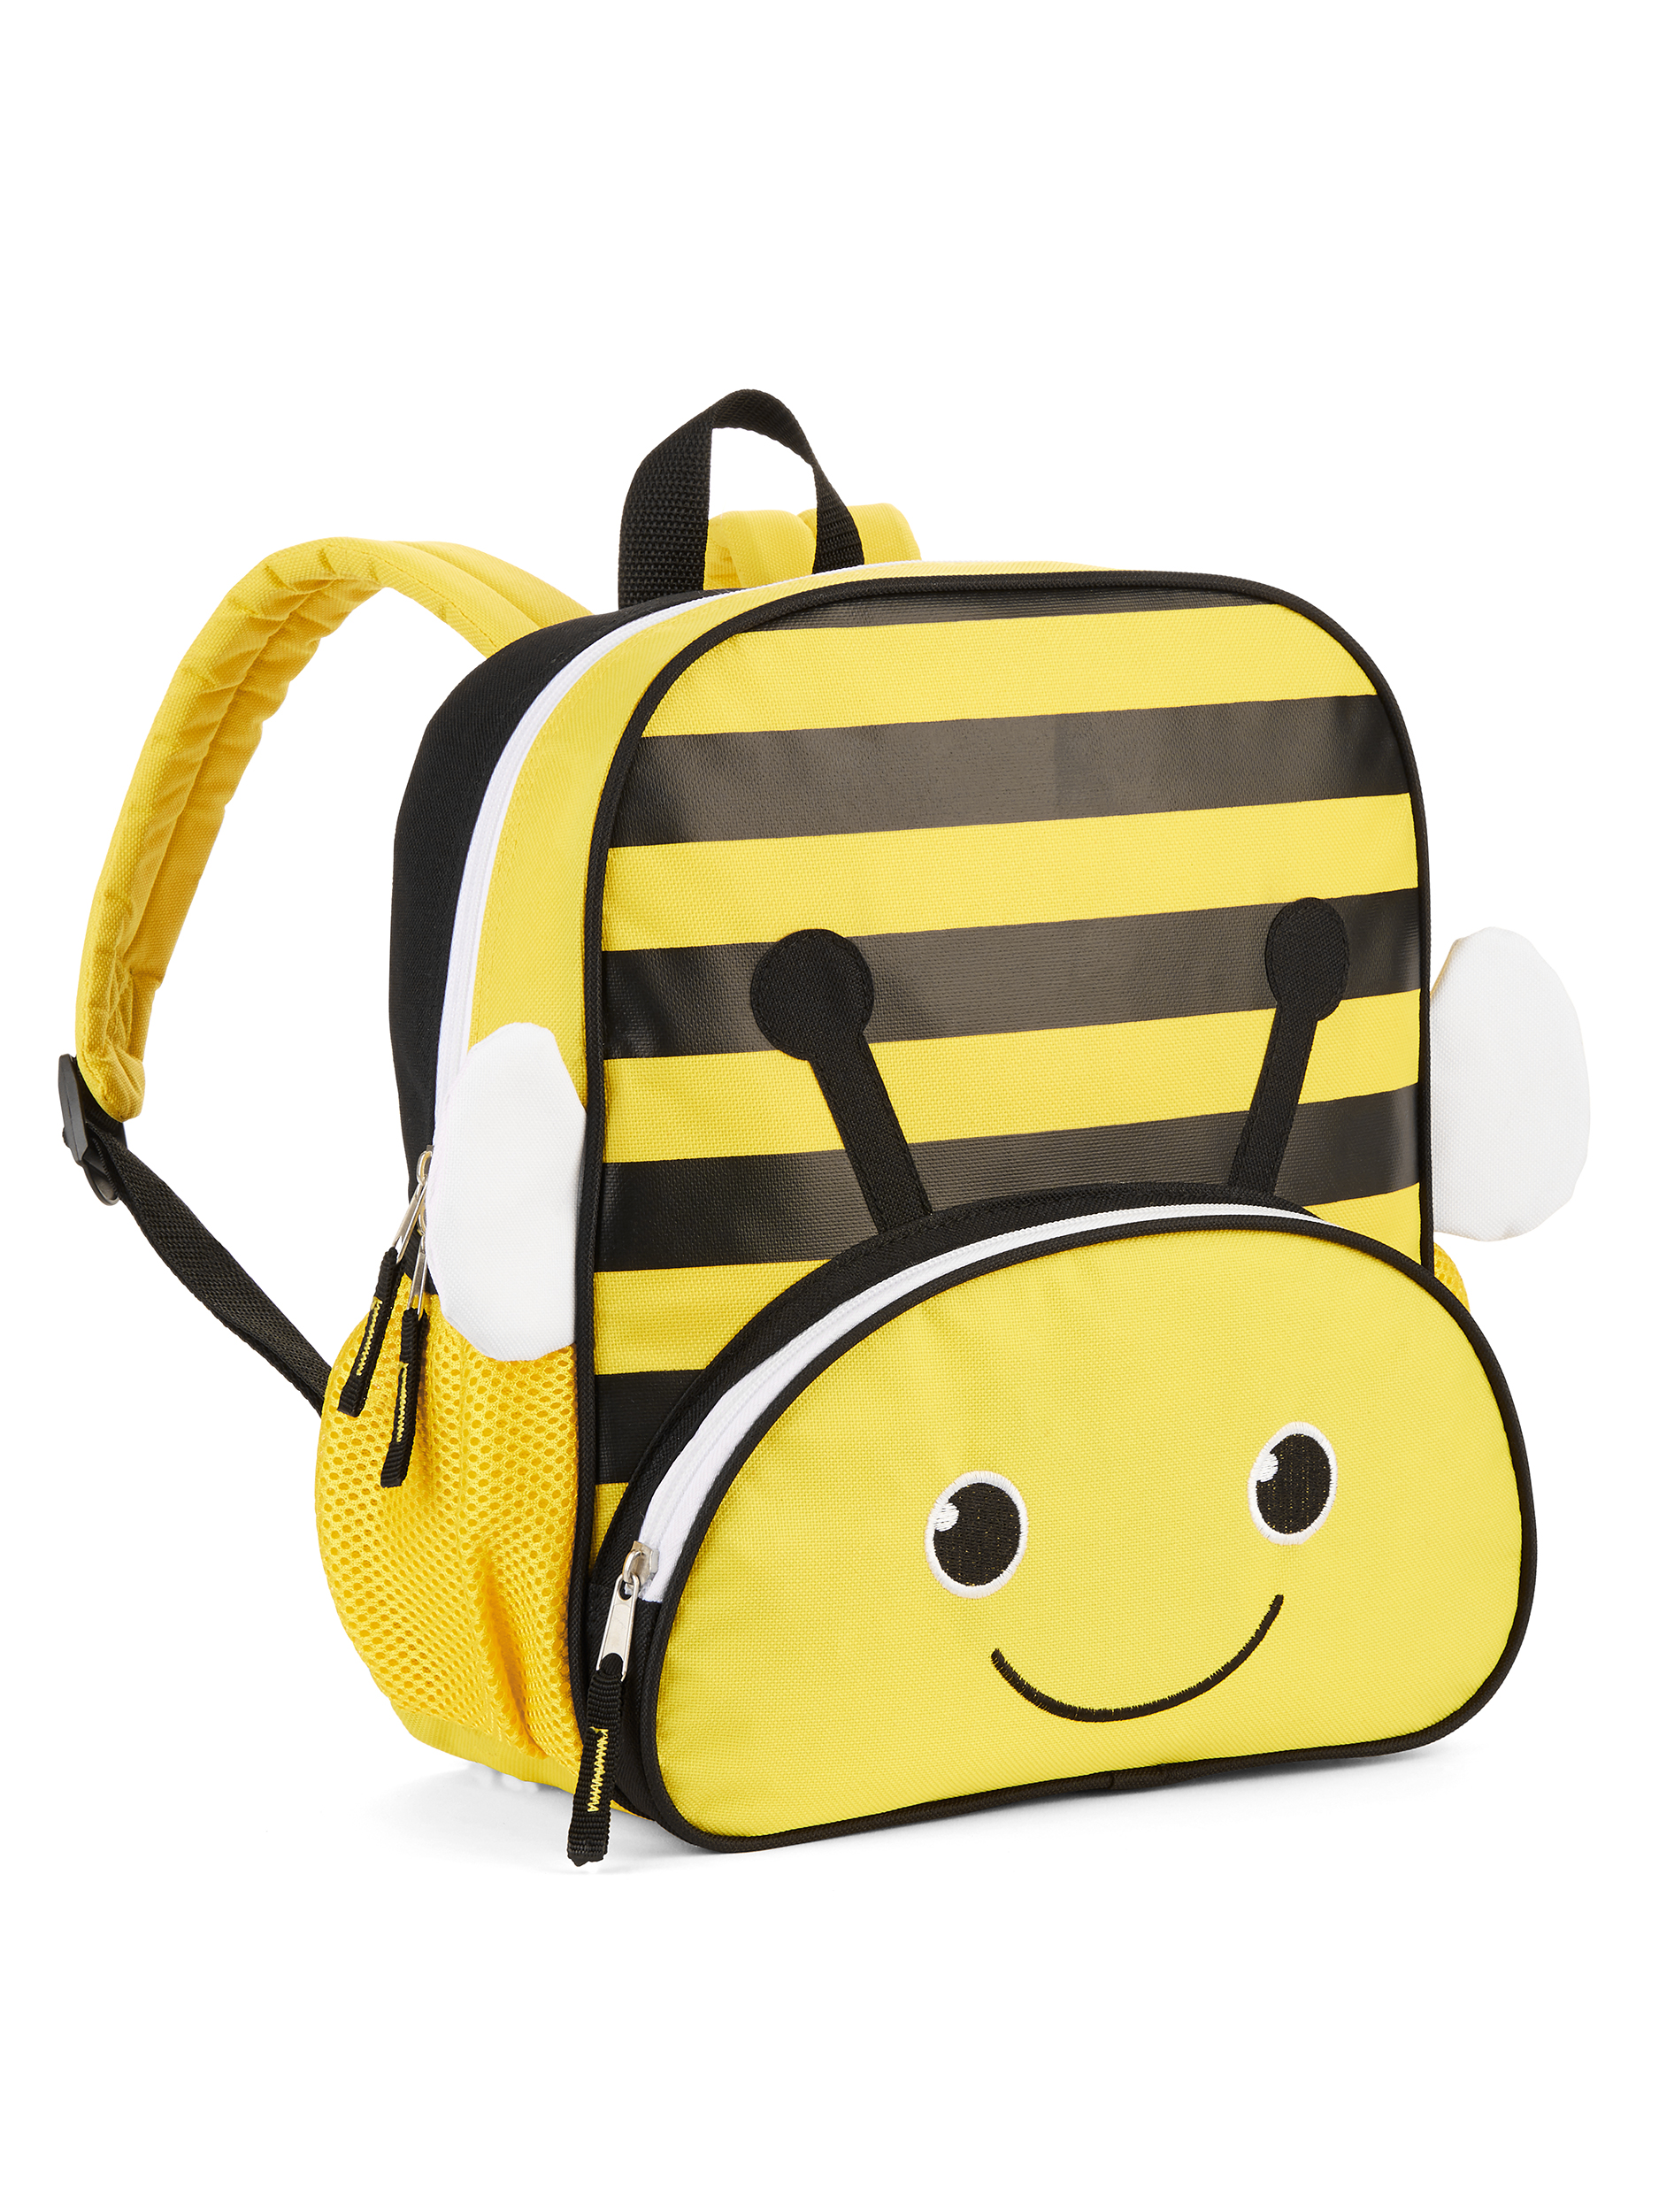 Wonder Nation Toddler Bumble Bee Critter Backpack - image 3 of 3